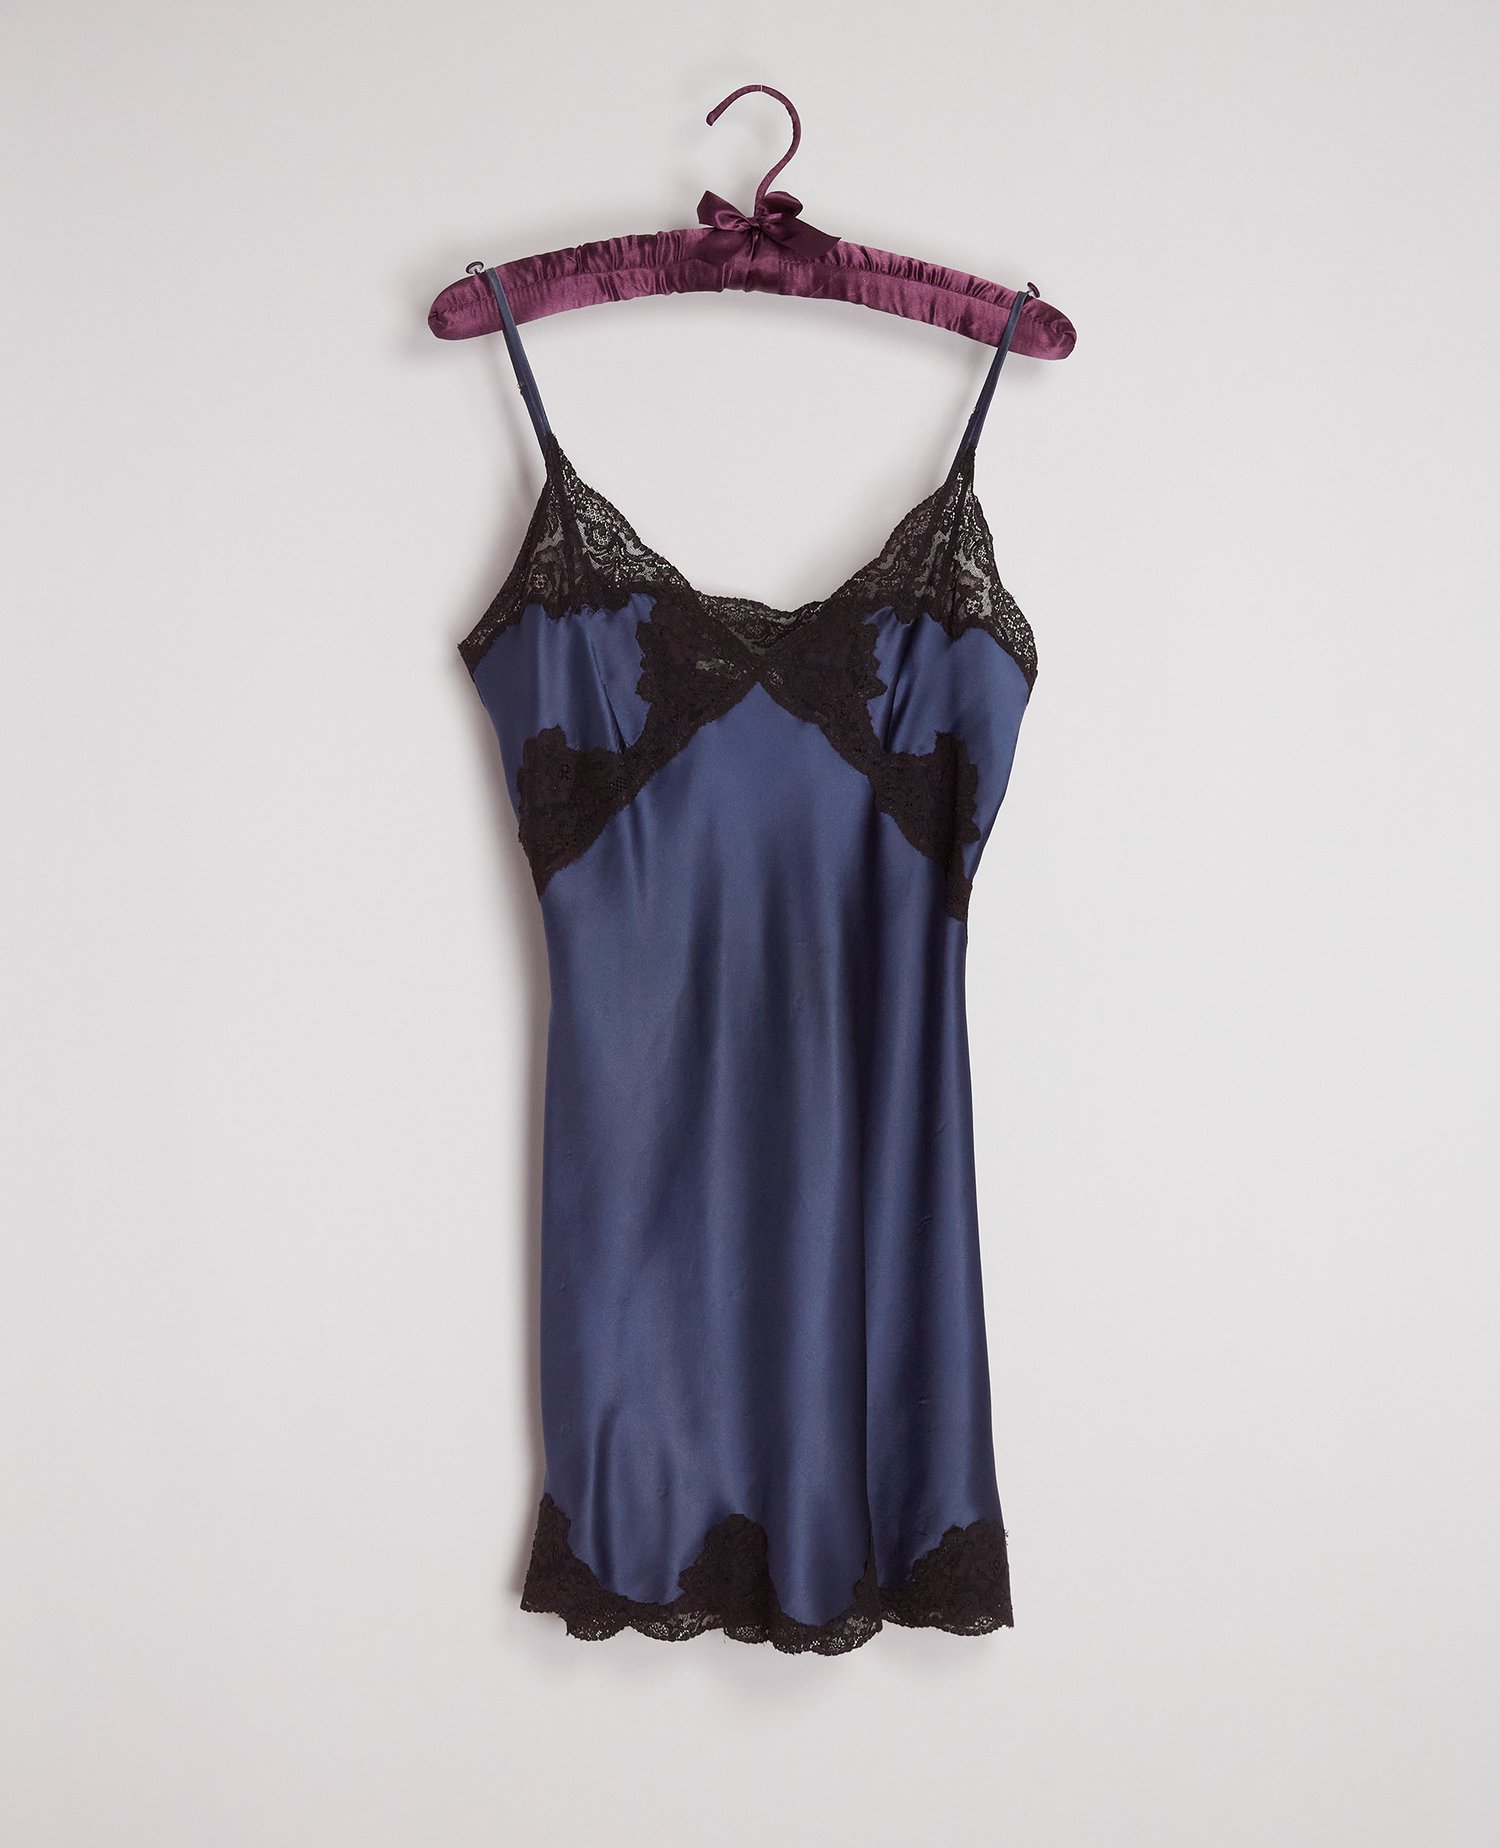 Women's silk satin lace trimmed camisole — Jane again cashmeres